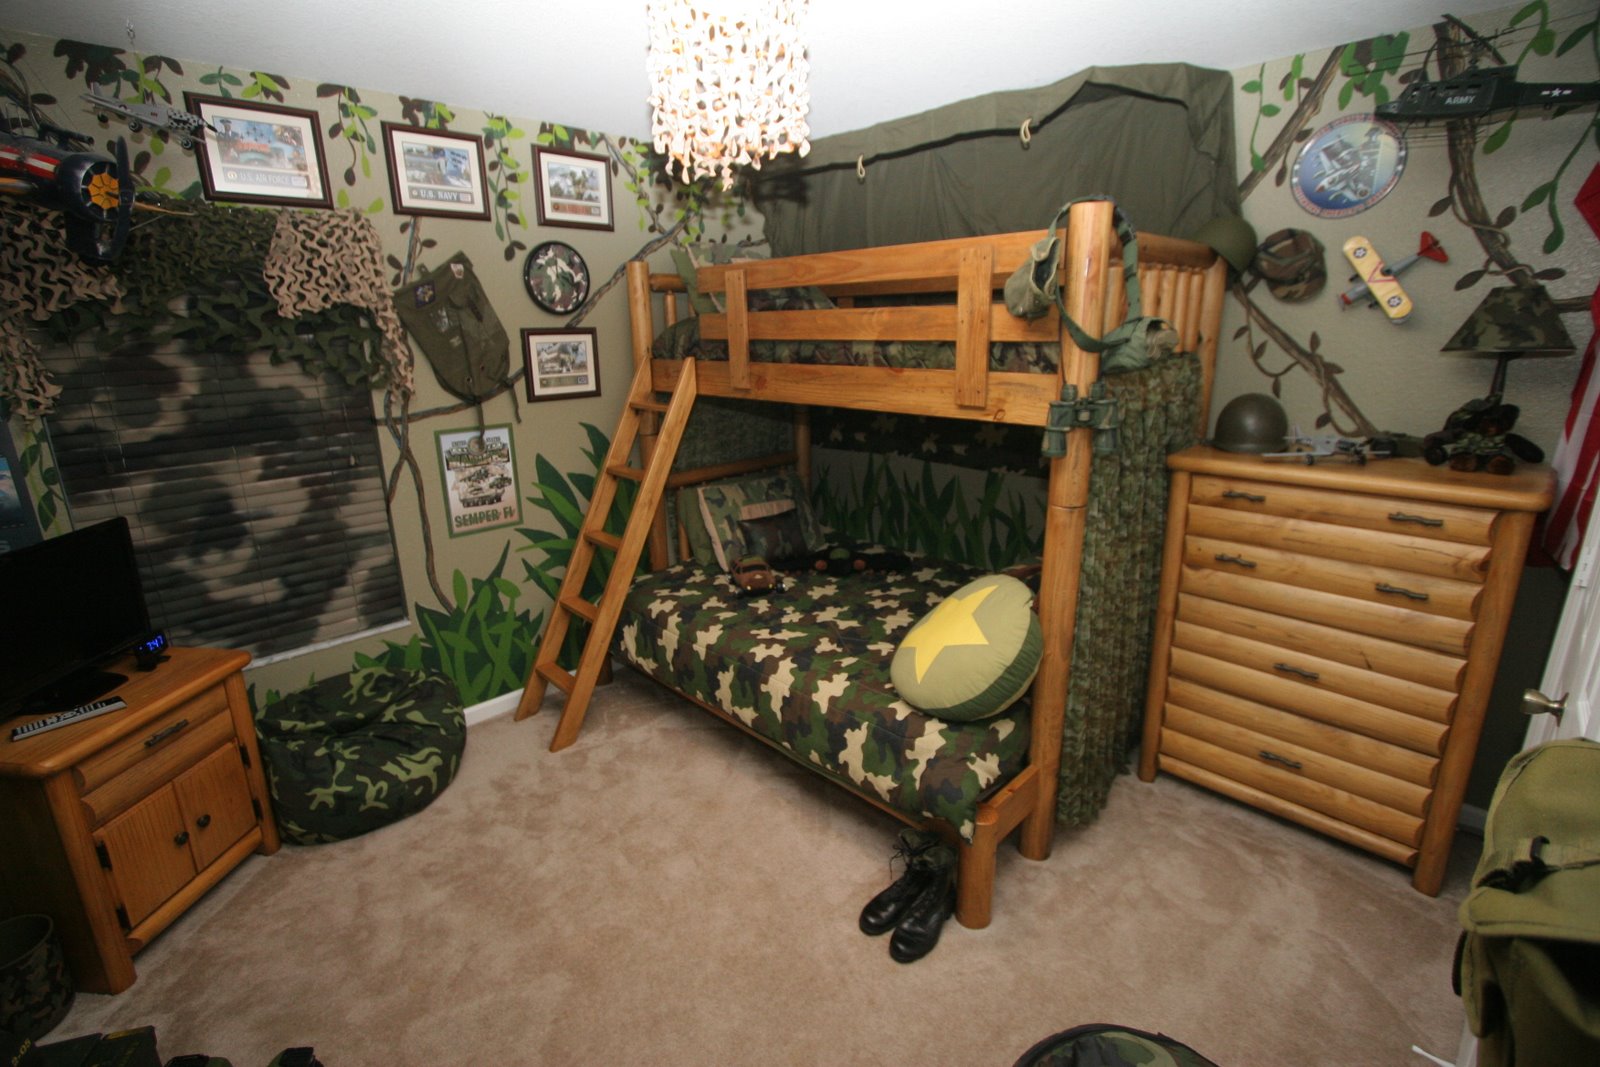 Army Design Bedroom Marvelous Army Design Of Boys Bedroom Ideas With Twin Bunk Bed On Wooden Platform Completed With Drawers And Flat Screen TV Also Furnished With Crystal Lighting Bedroom Boys Bedroom Ideas: The Important Aspects